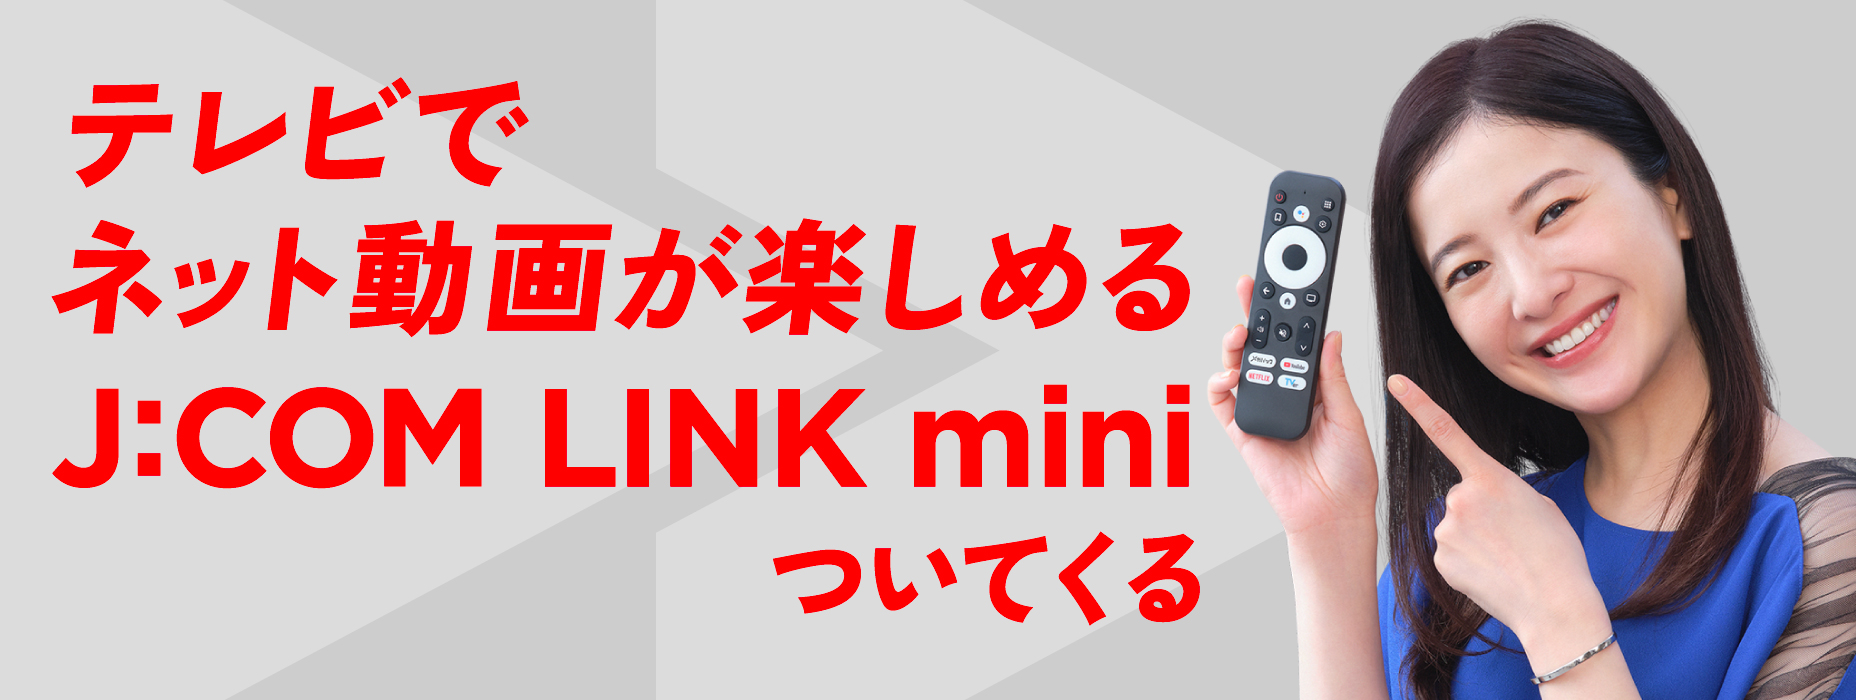 With J:COM Net, you can enjoy online videos on your TV. Provided with J:COM LINK mini.